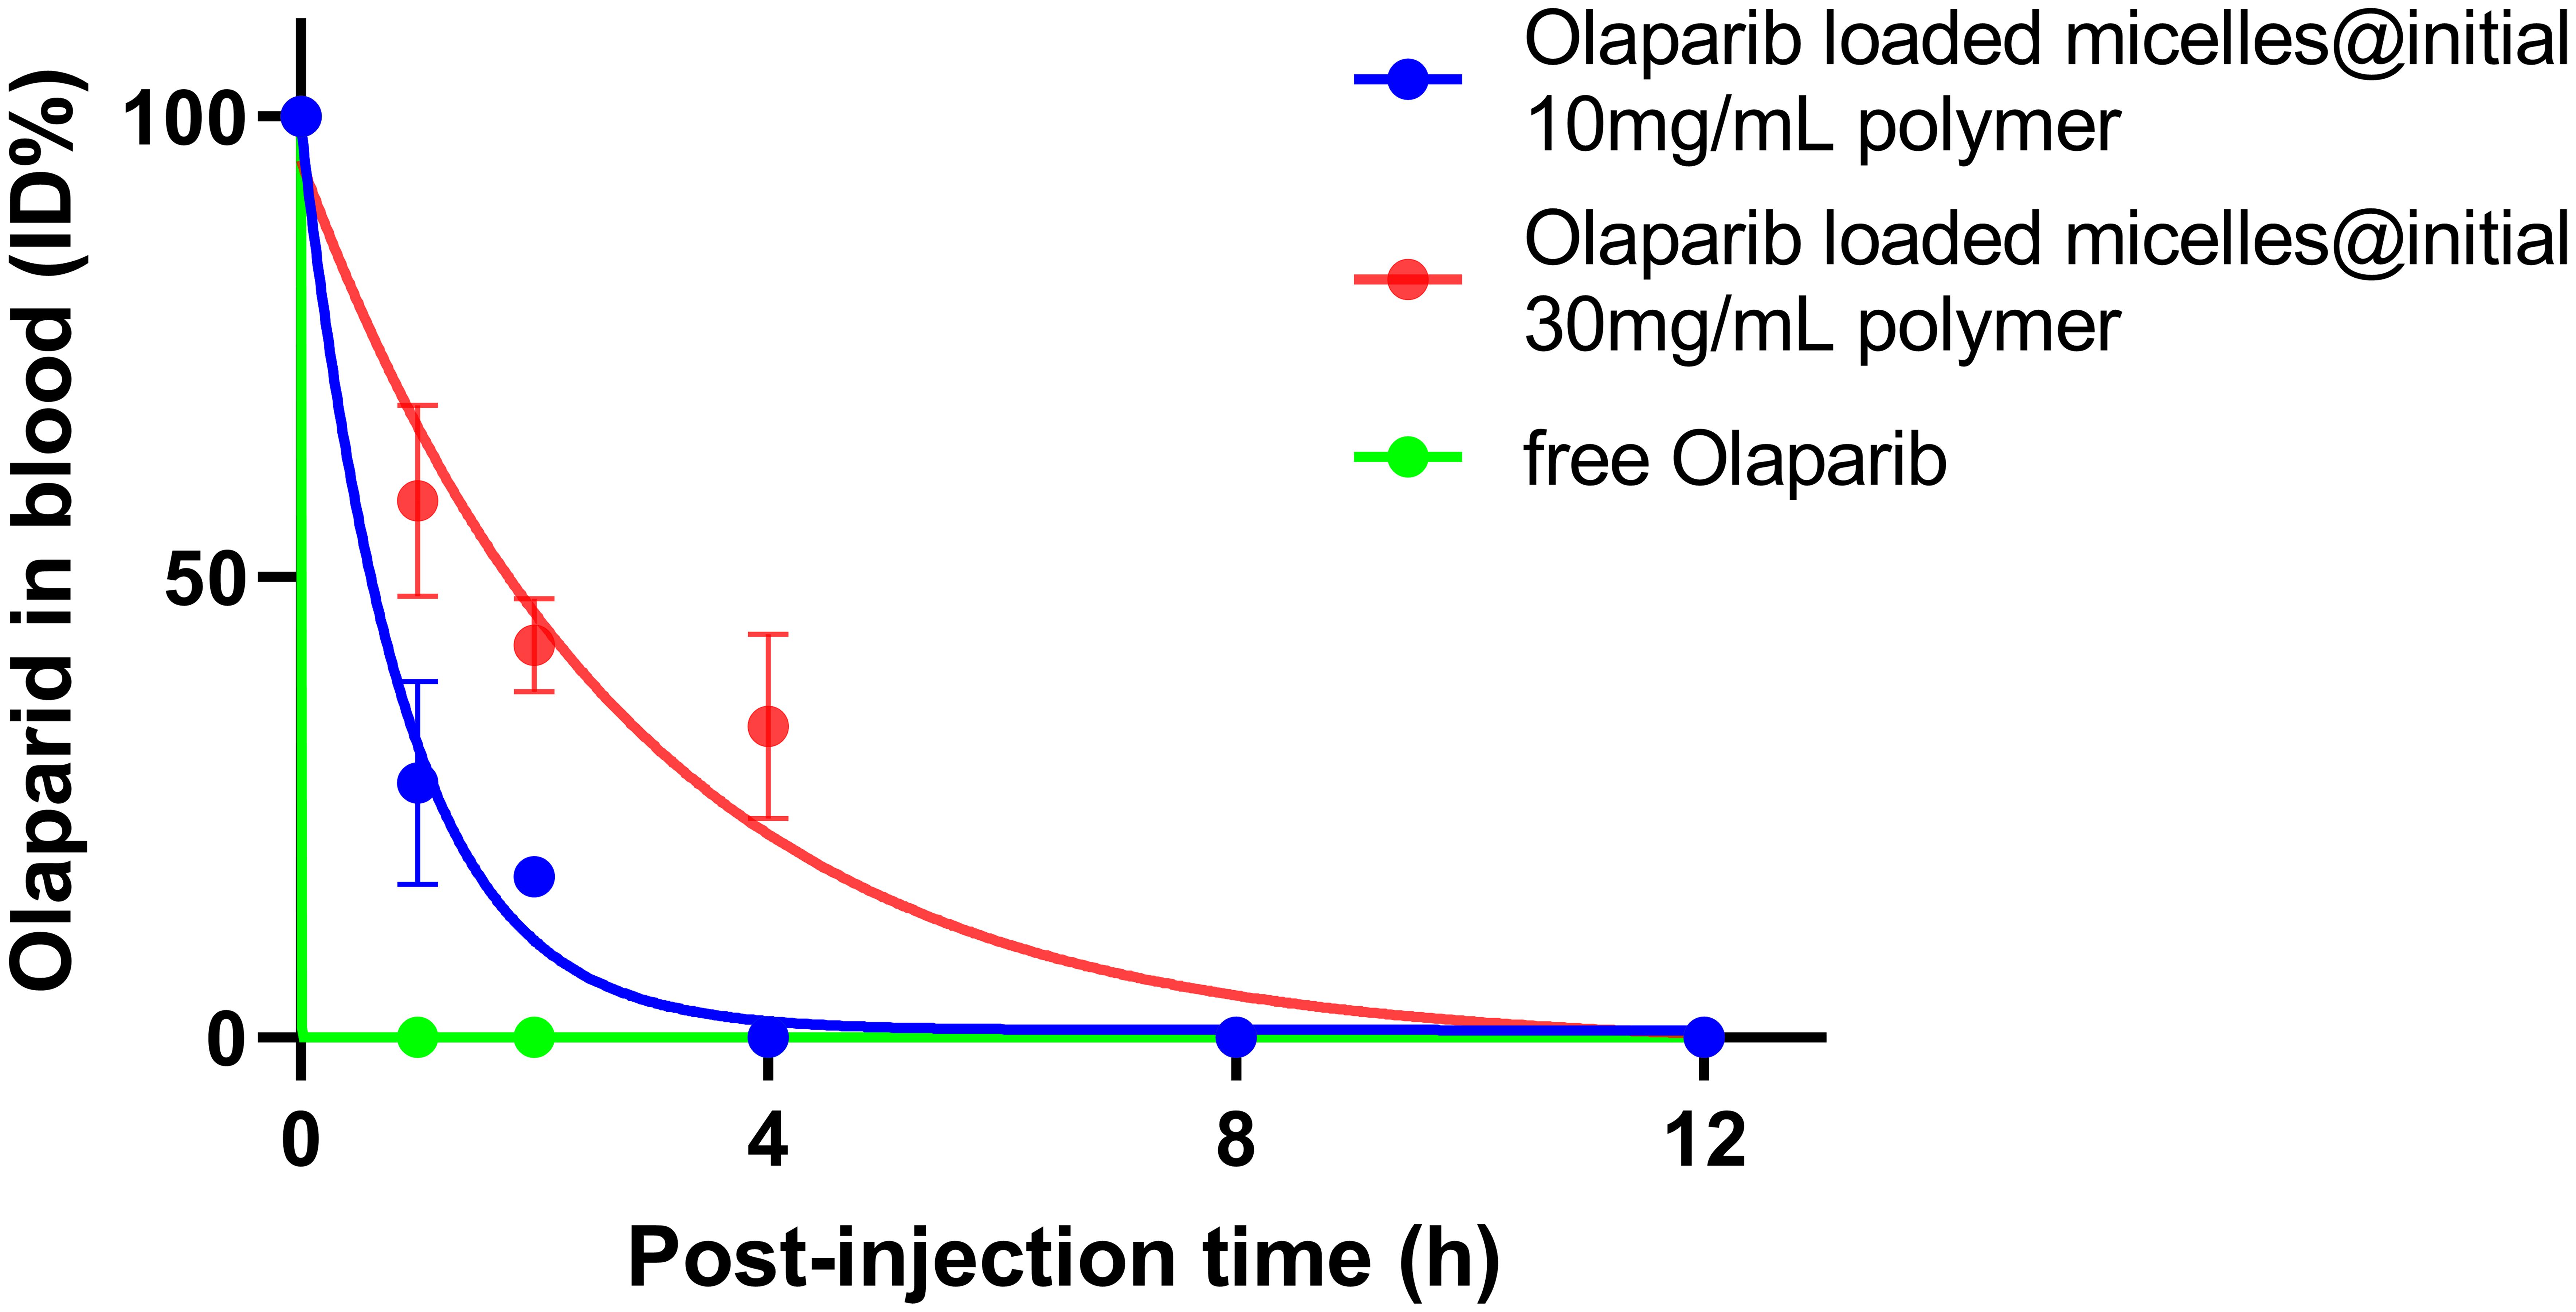 <italic>In vivo</italic> pharmacokinetics of free olaparib and olaparib-loaded micelles (the injected polymer concentration was 10 and 30 mg/mL, respectively) upon tail vein administration in SD rats (10 mg of olaparib per kg bodyweight of rat, i.e., ∼2 mg of olaparib per rat, with an injection volume of approximately 500 µL).